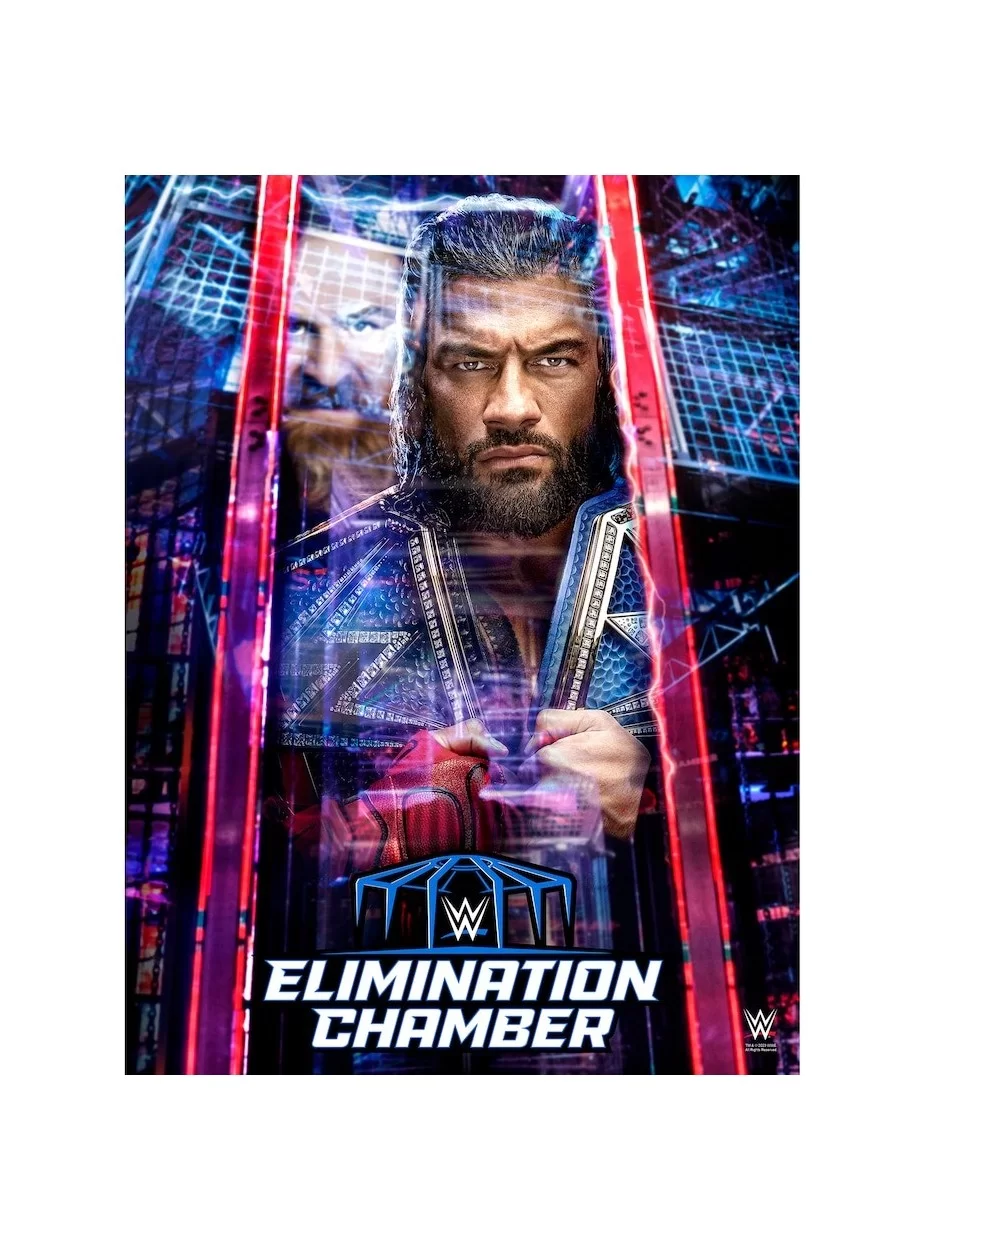 2023 WWE Elimination Chamber 18" x 24" Event Poster Art Photograph $9.60 Home & Office